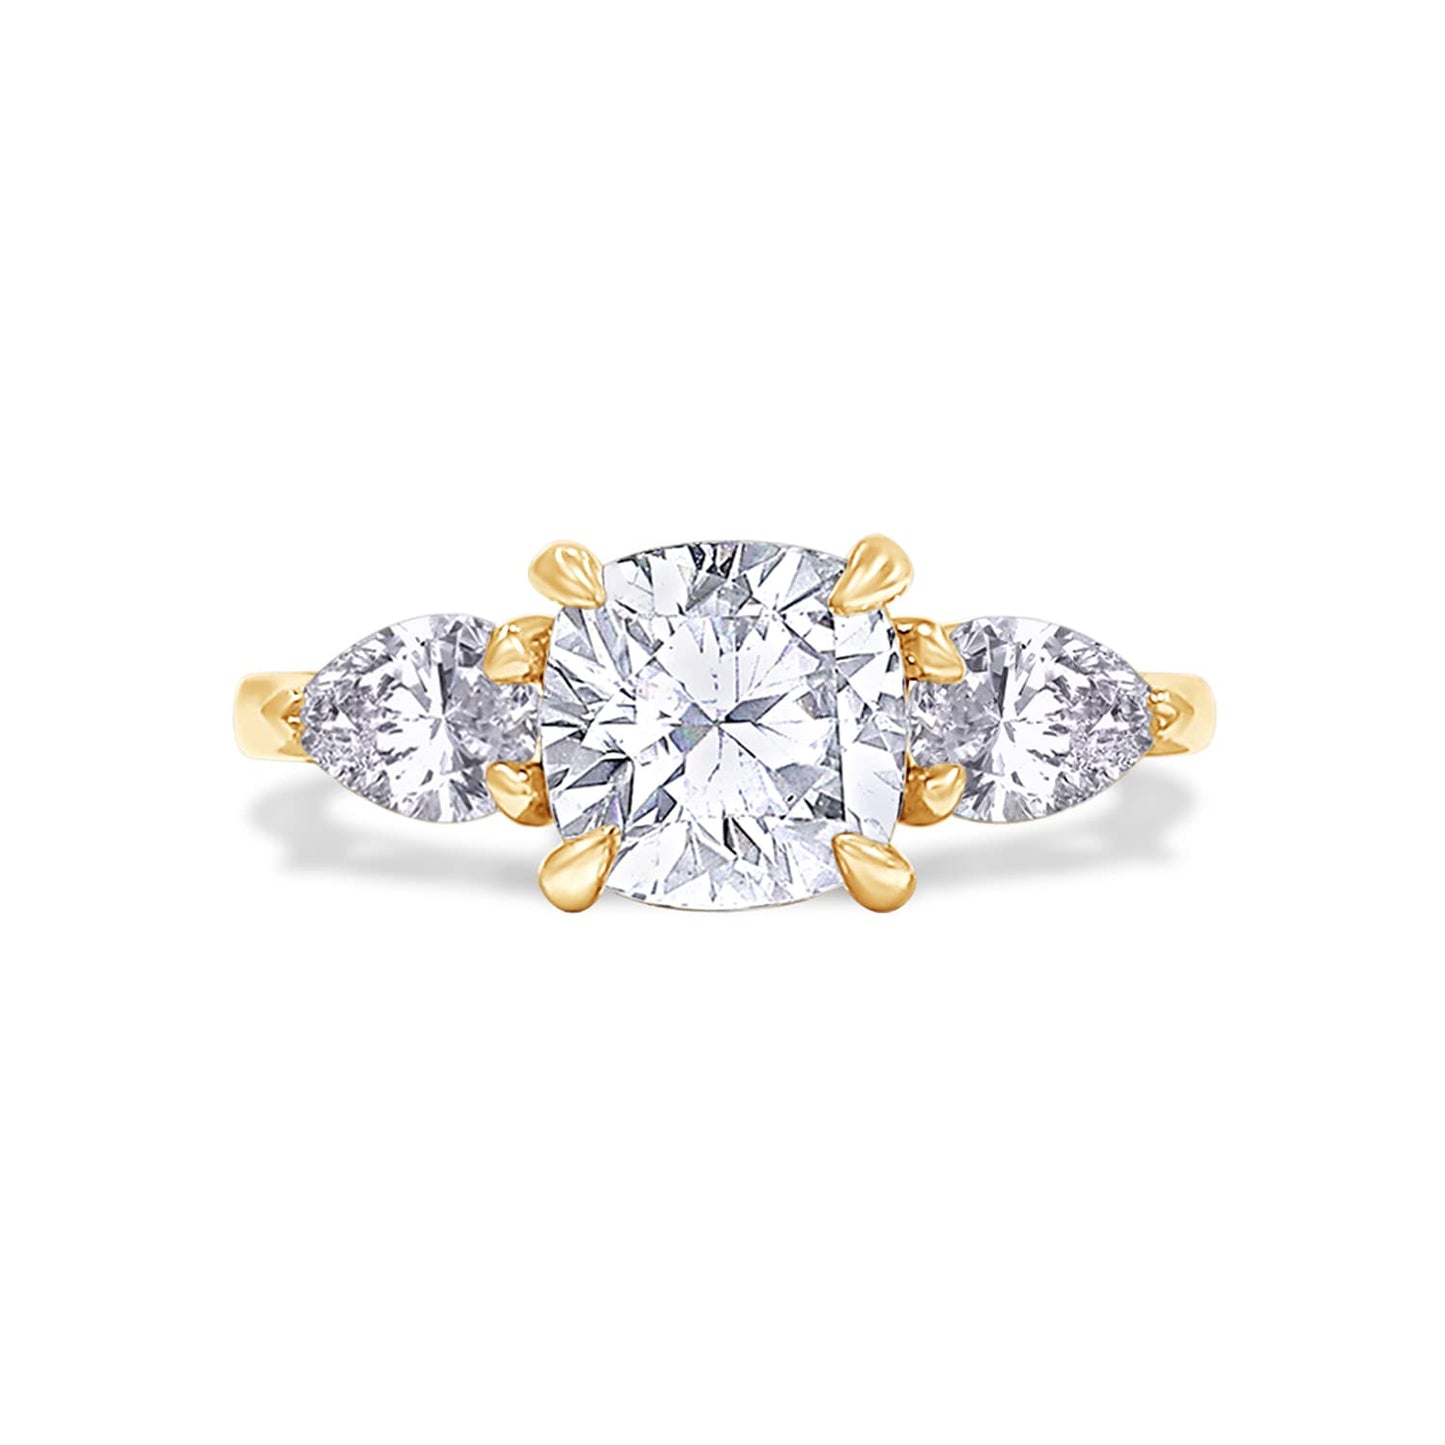 2.40 Carat Cushion & Pear Cut Lab Created Moissanite Diamond 3-Stone Engagement Ring In 925 Sterling Silver